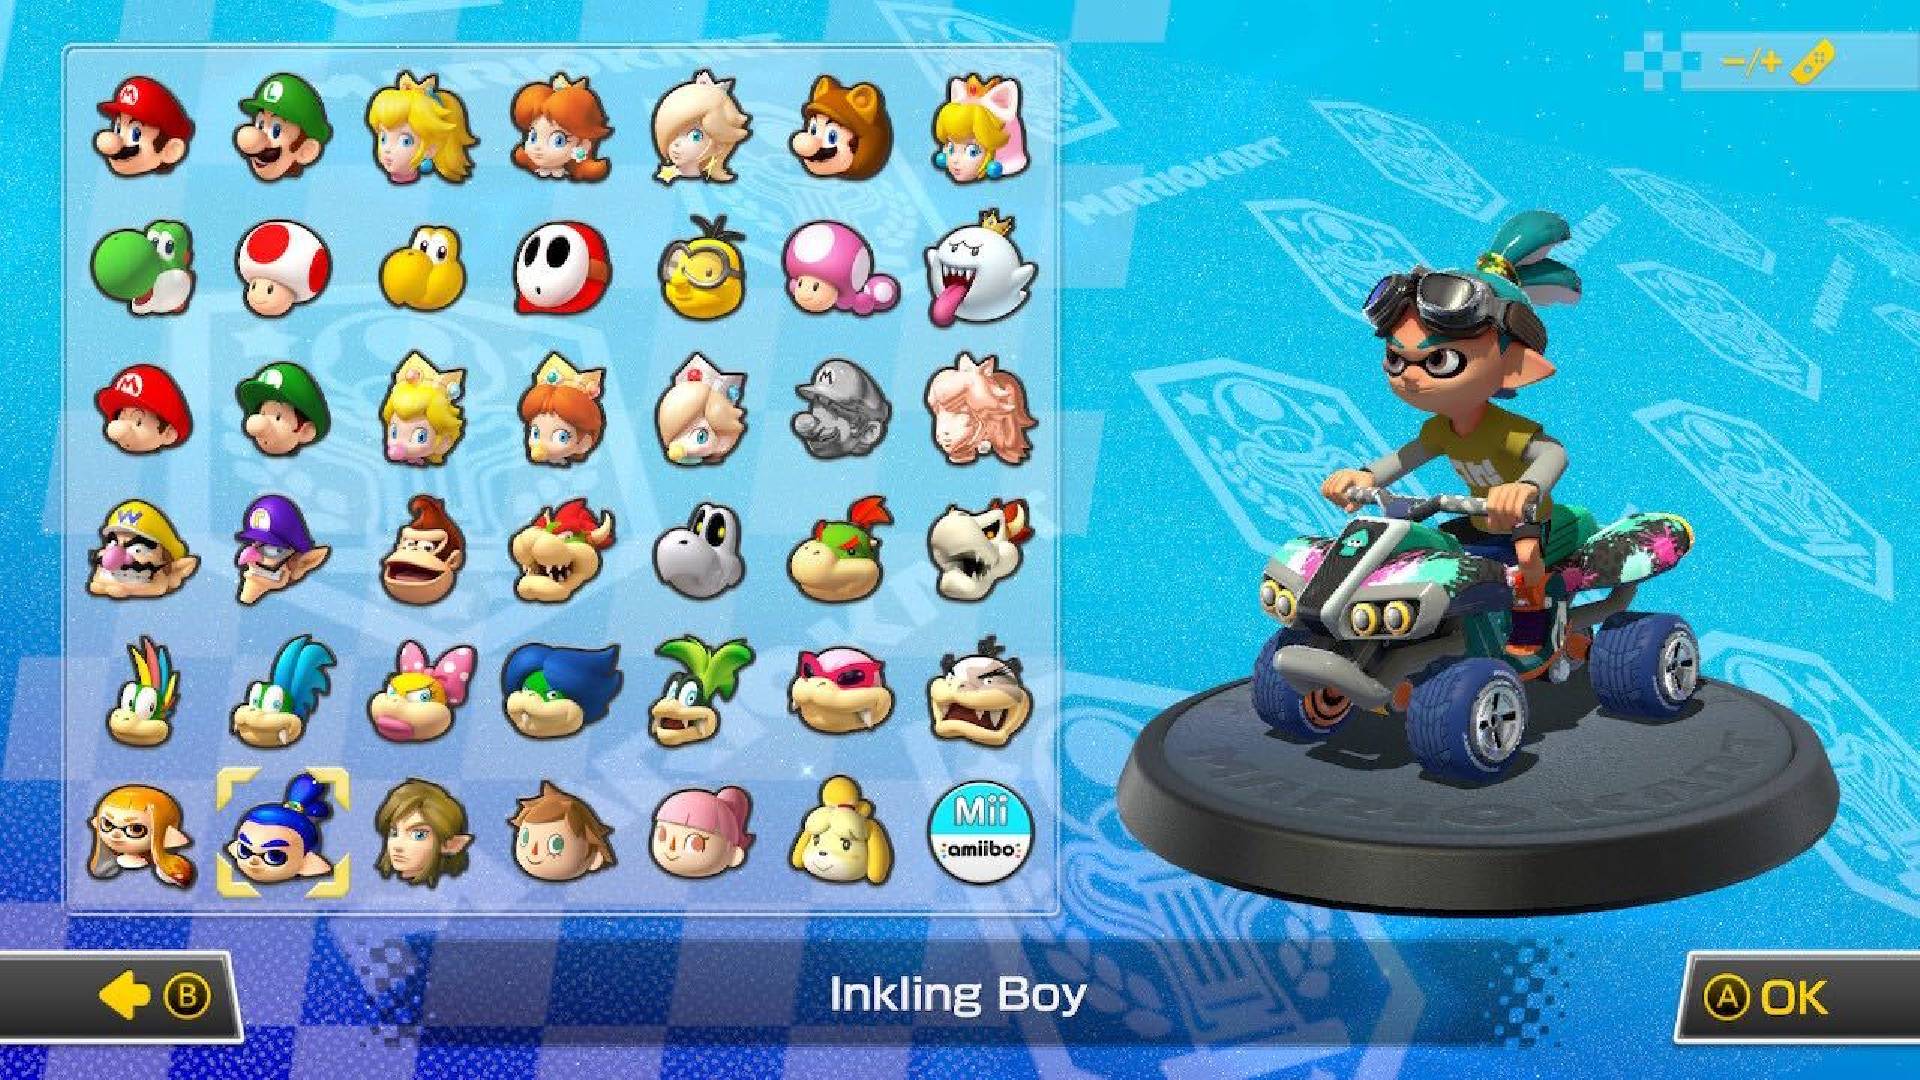 Inkling Boy from Splatoon is visible on a character selection screen, sitting in a kart